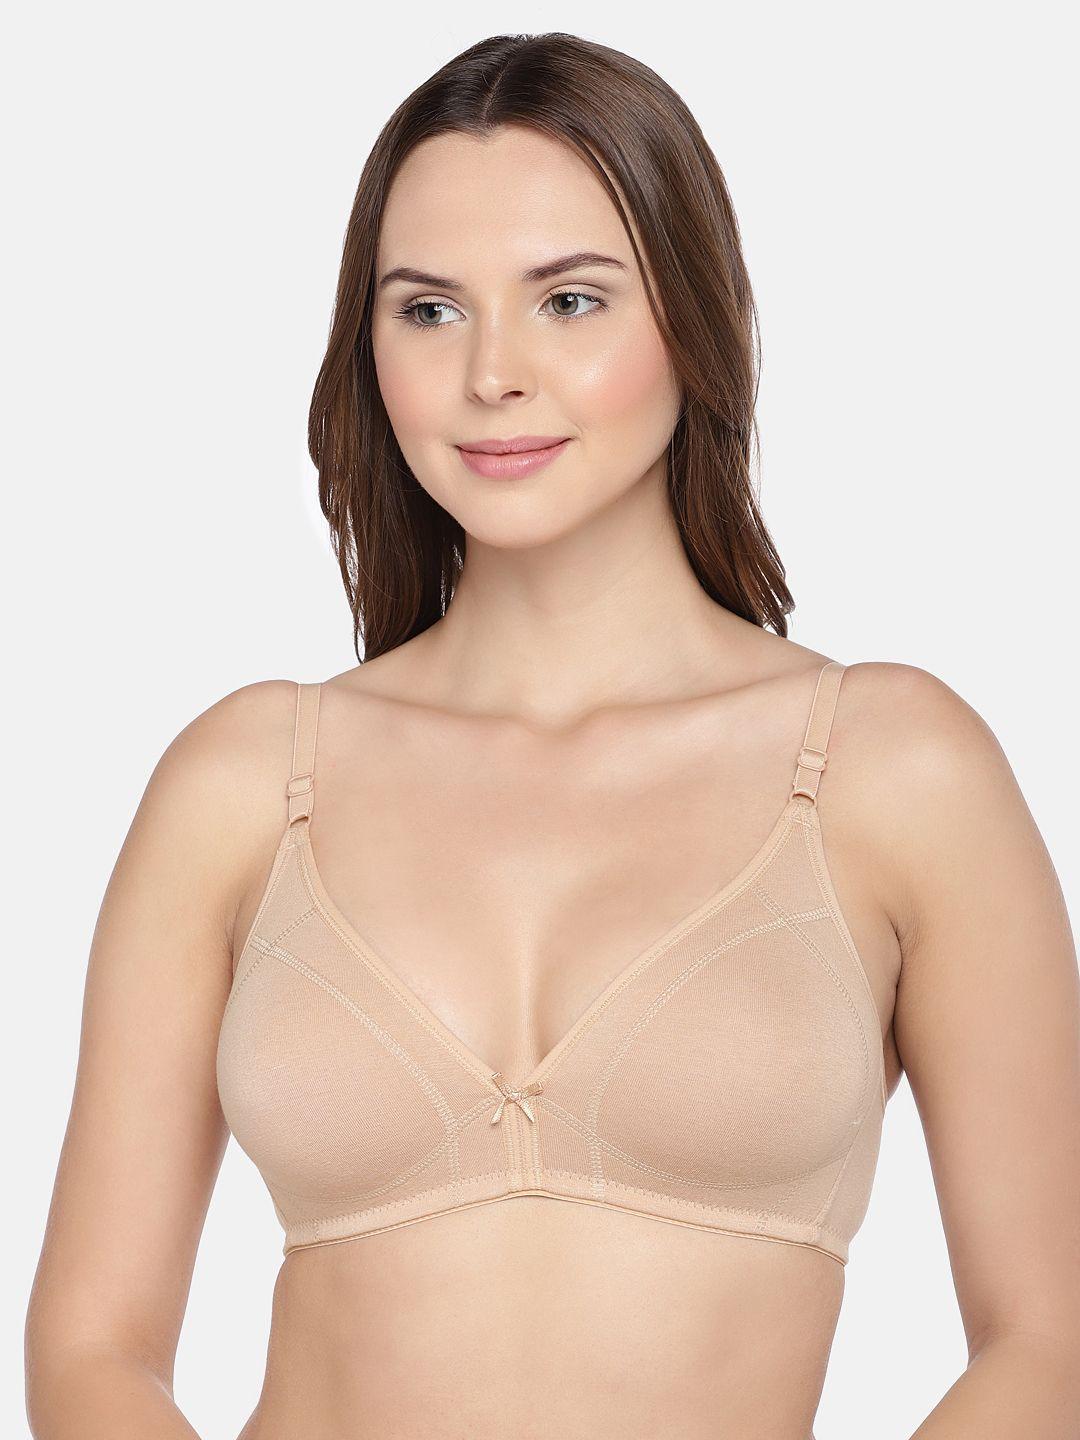 inner sense beige organic cotton antimicrobial sustainable seamless bra with supportive stitch isb099